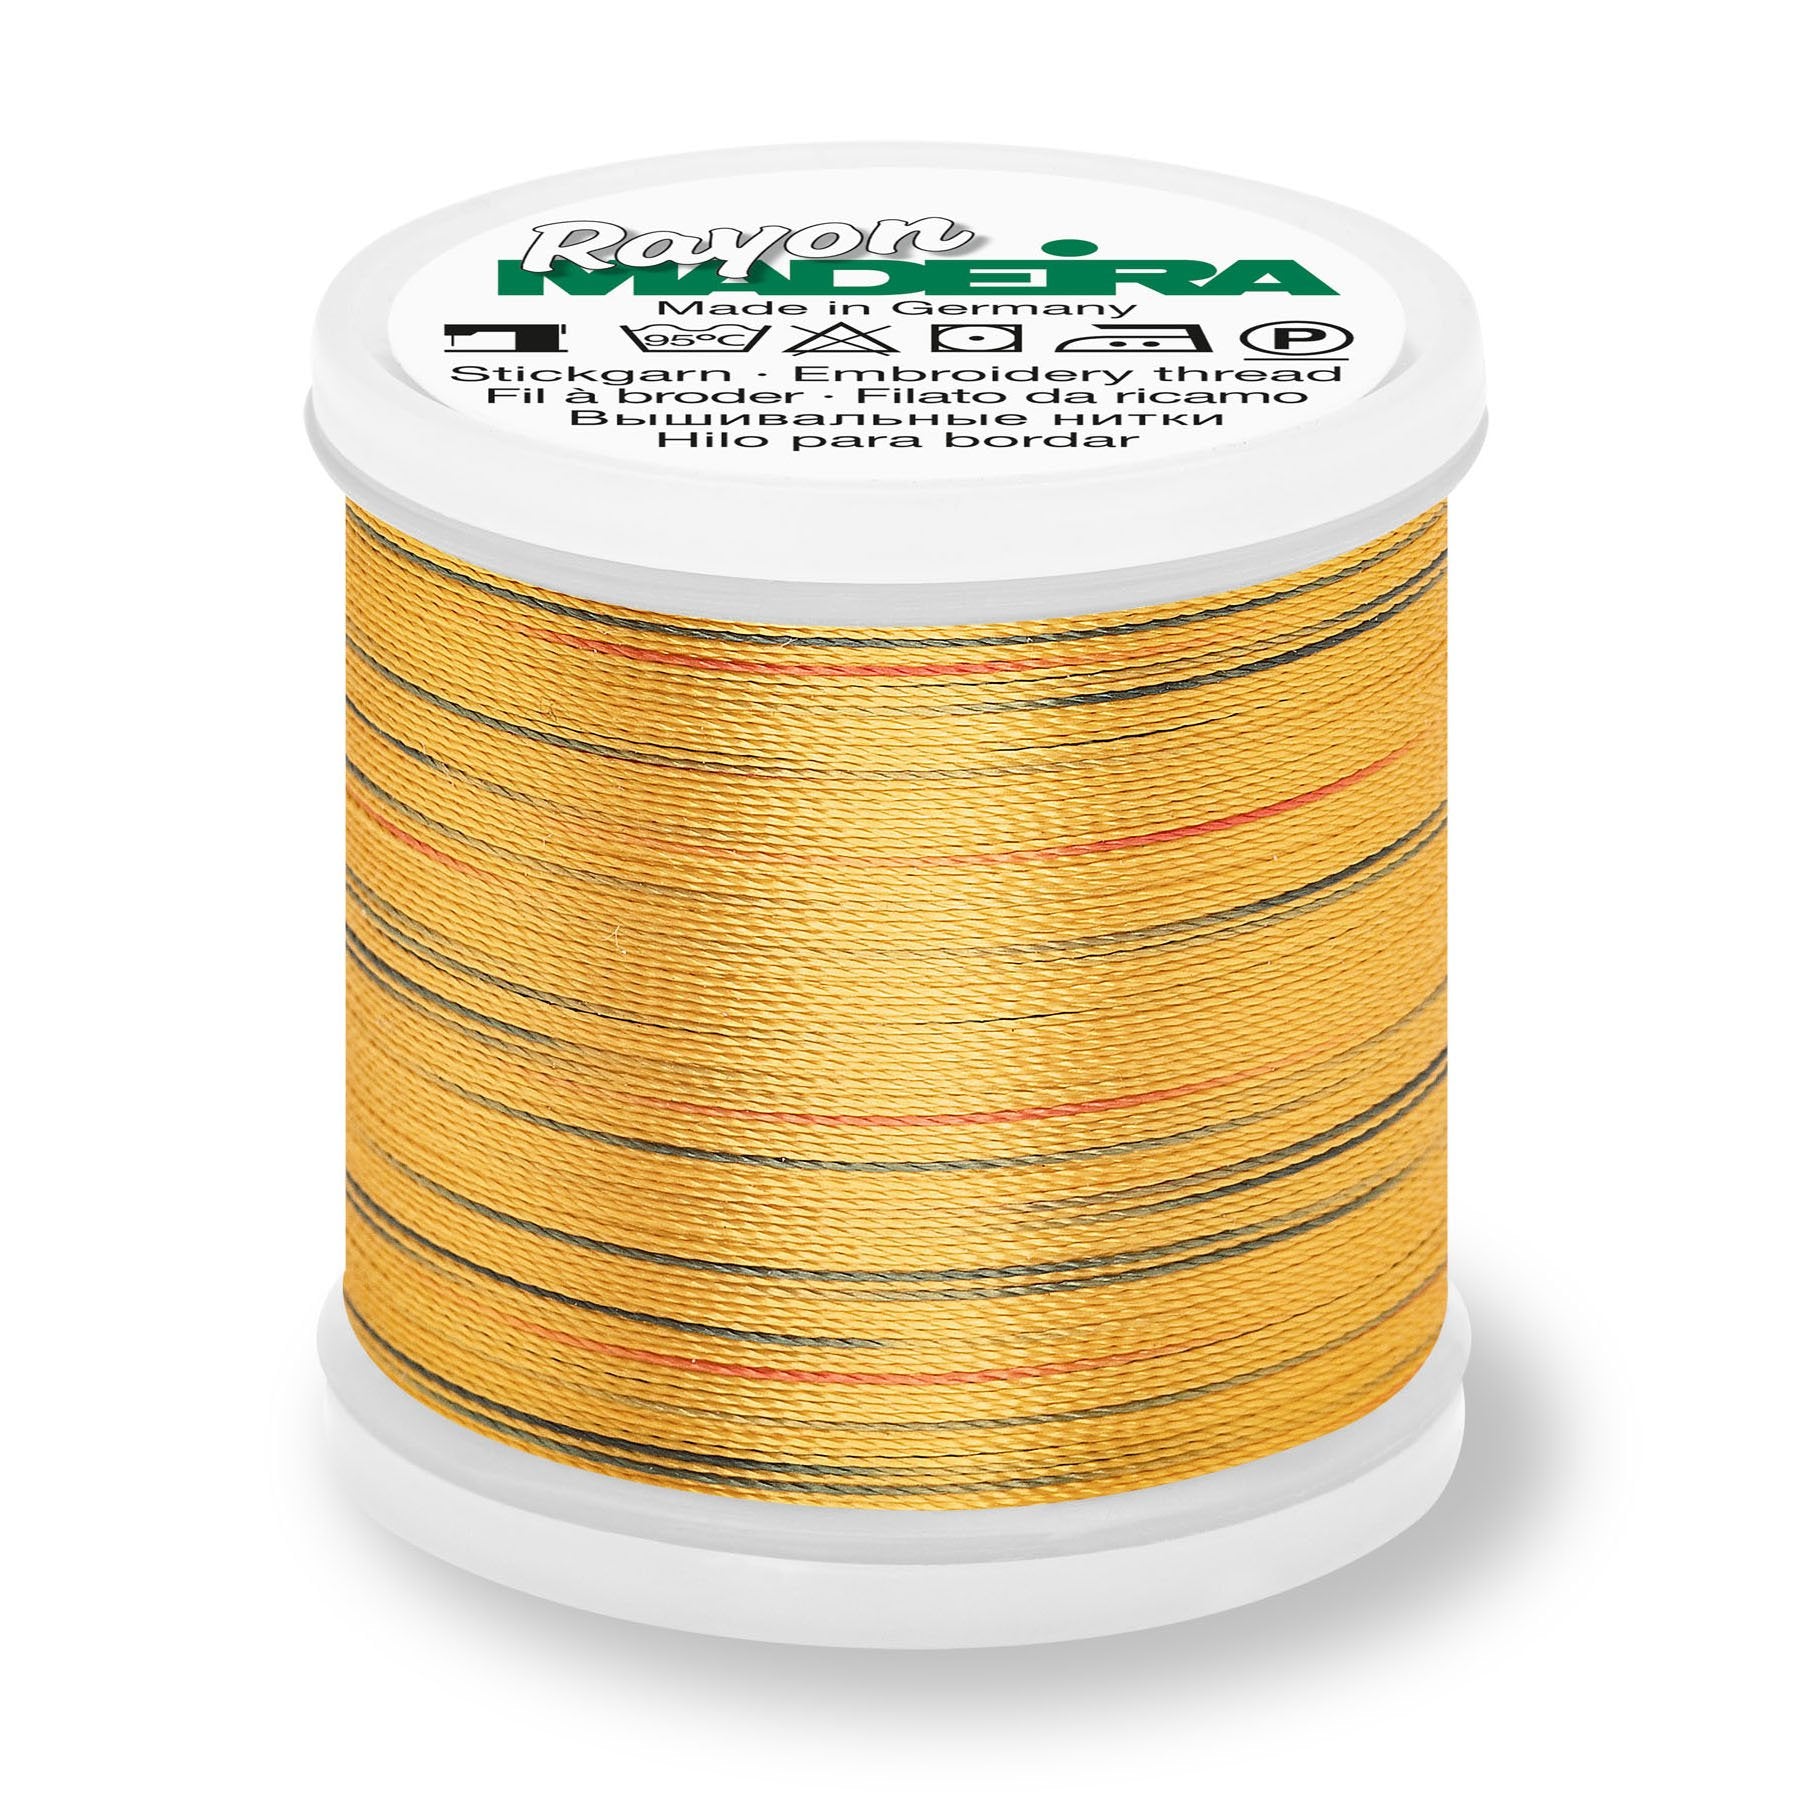 Madeira Rayon 40 Embroidery Thread 200m Potpourri 2314 Dandelion from Jaycotts Sewing Supplies